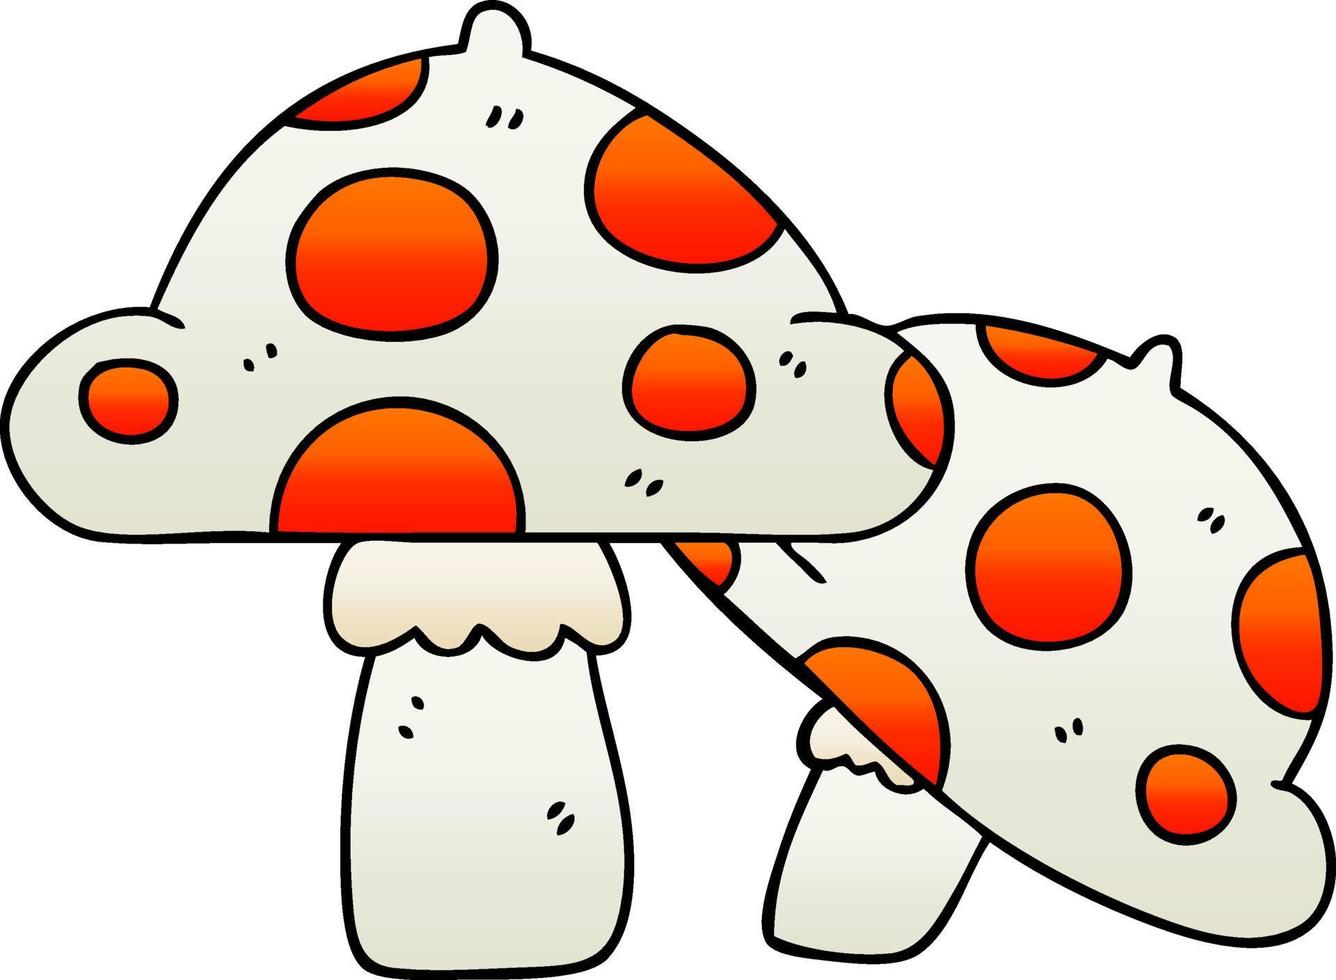 quirky gradient shaded cartoon toadstools vector